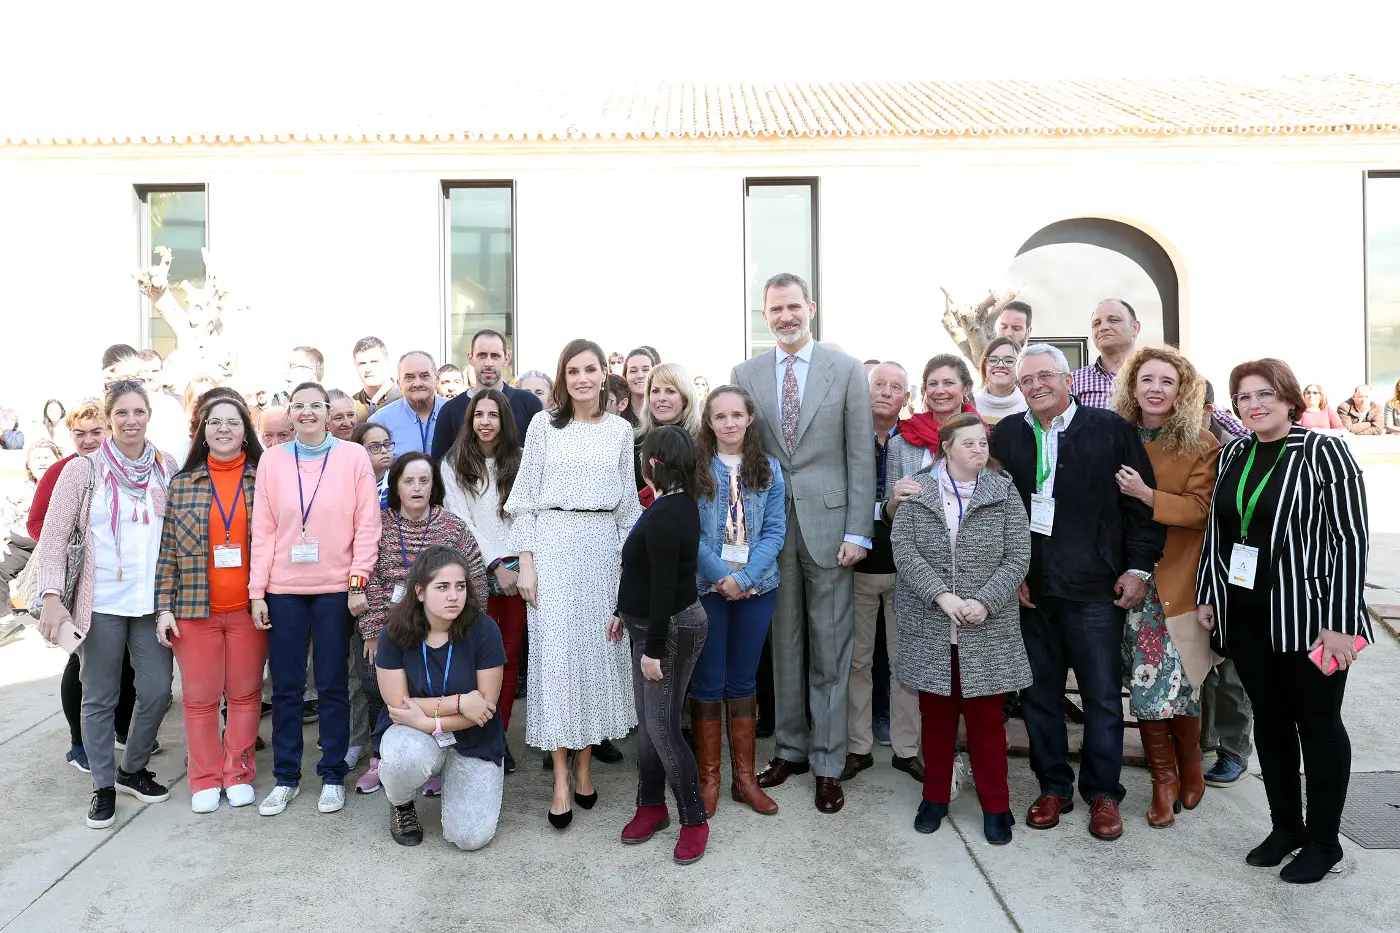 King Felipe and Queen Letizia of Spain marked Doñana National Park's 50th anniversary